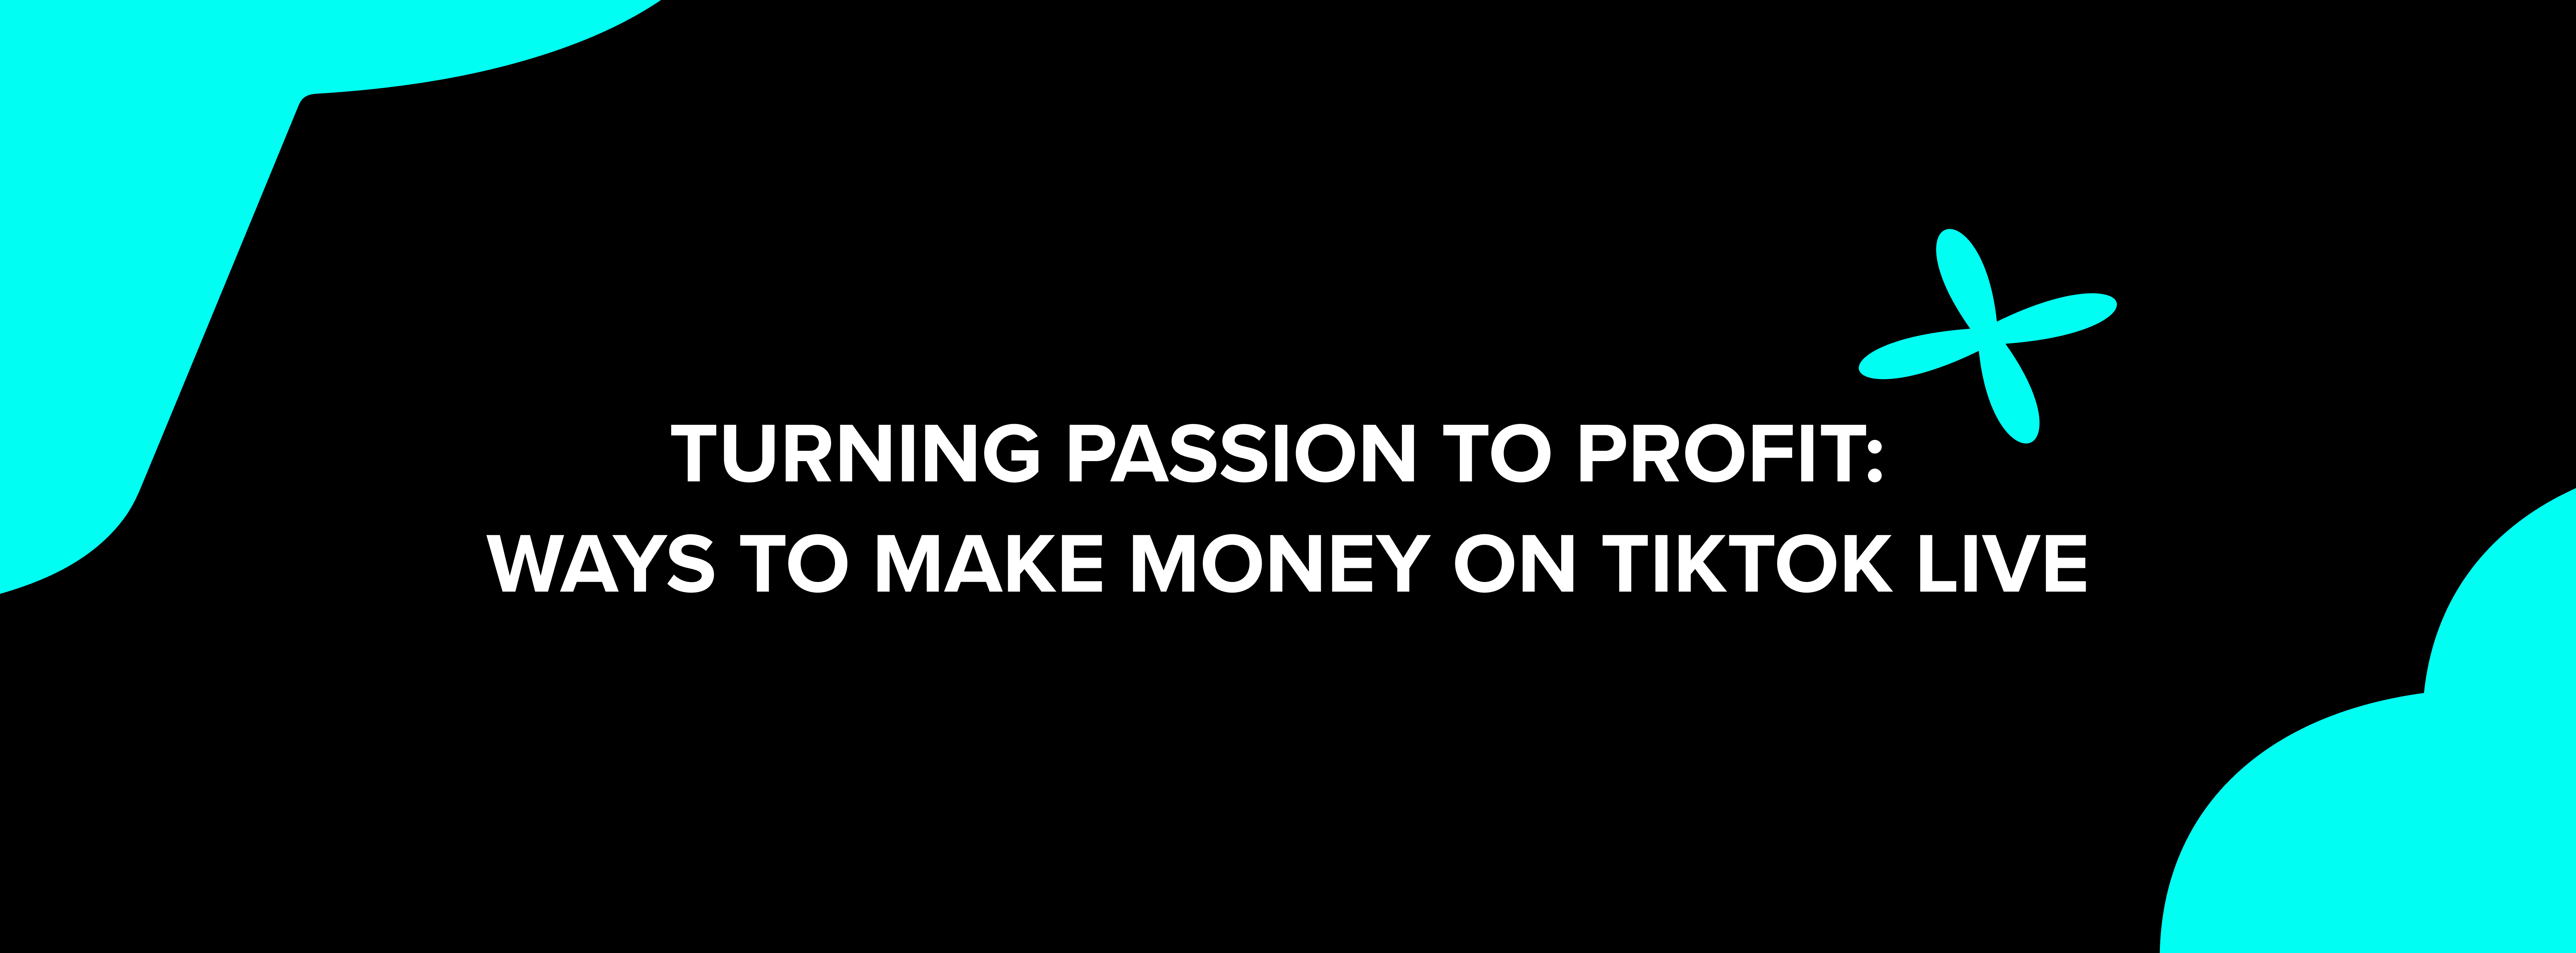 How TikTok is turning people's passions into profits